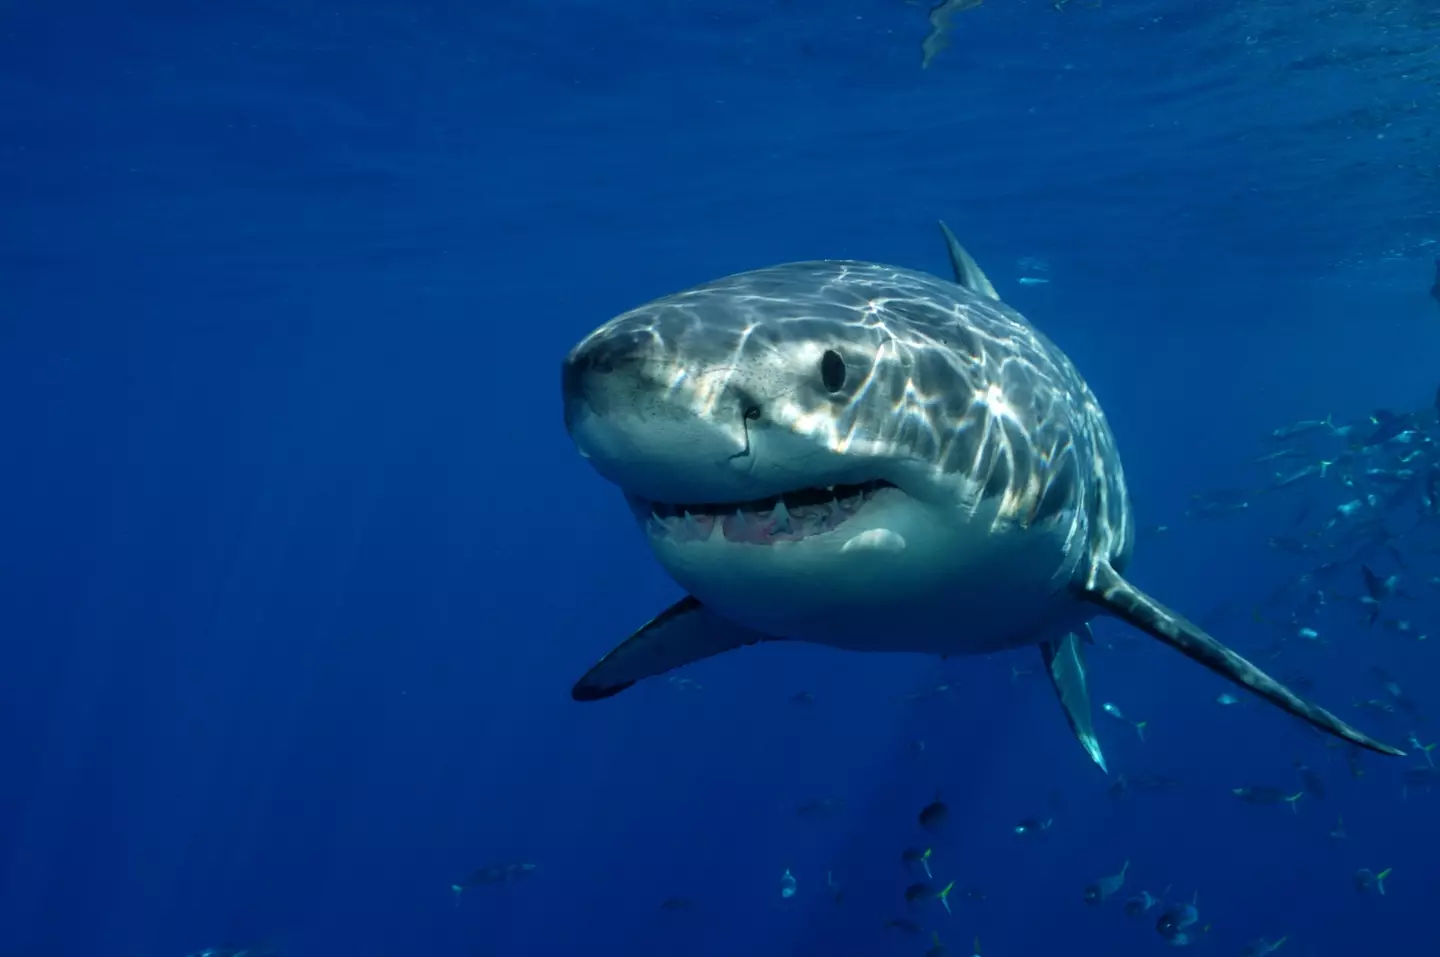 The shark has been confirmed to be a great white by the California Department of Fish and Wildlife.